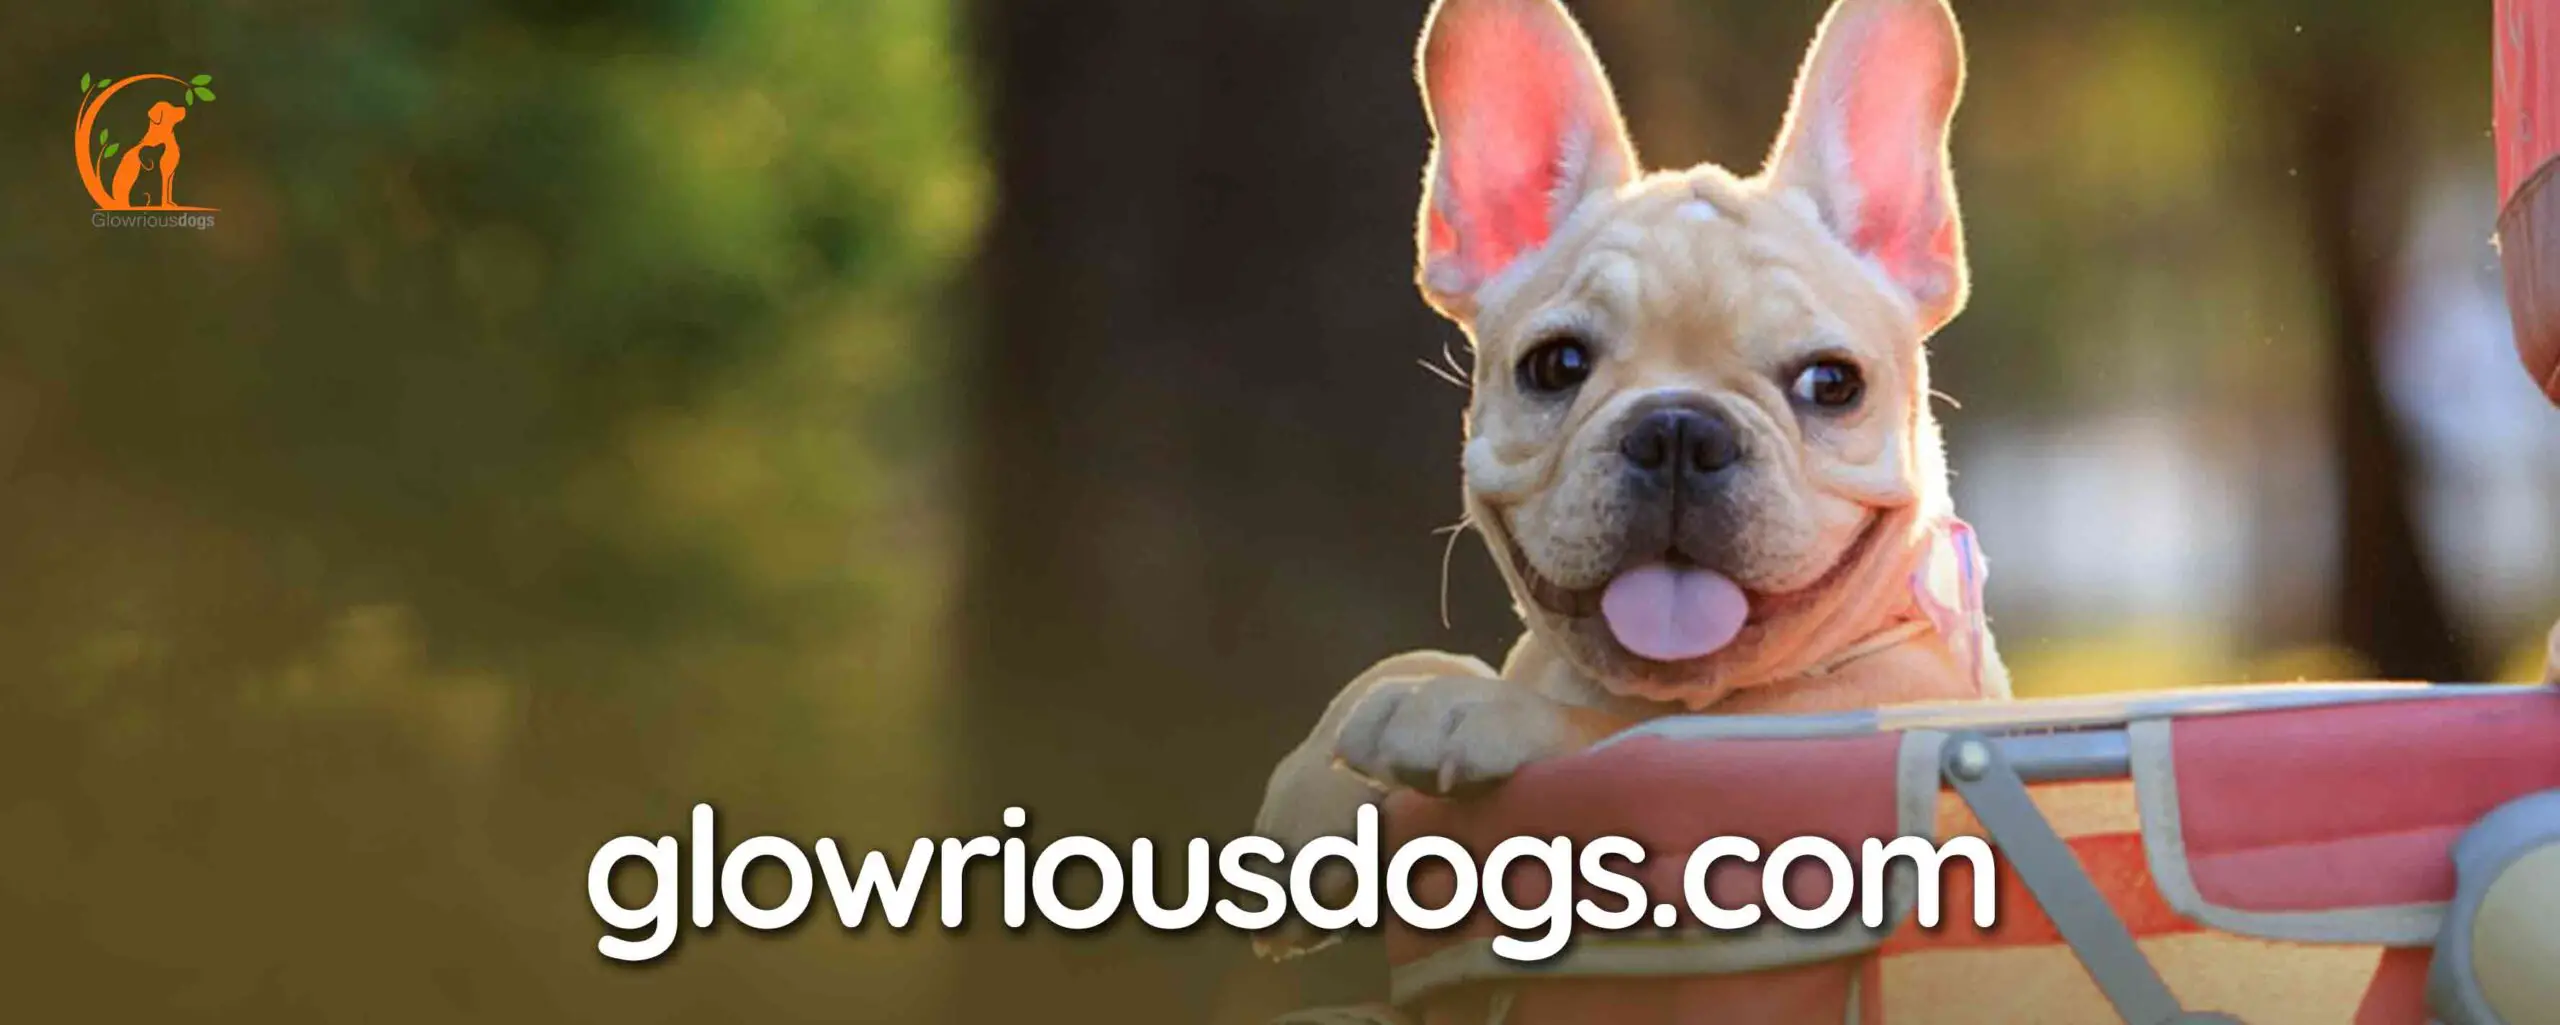 Best Dog Strollers for French Bulldogs: Benefits, Safety & More